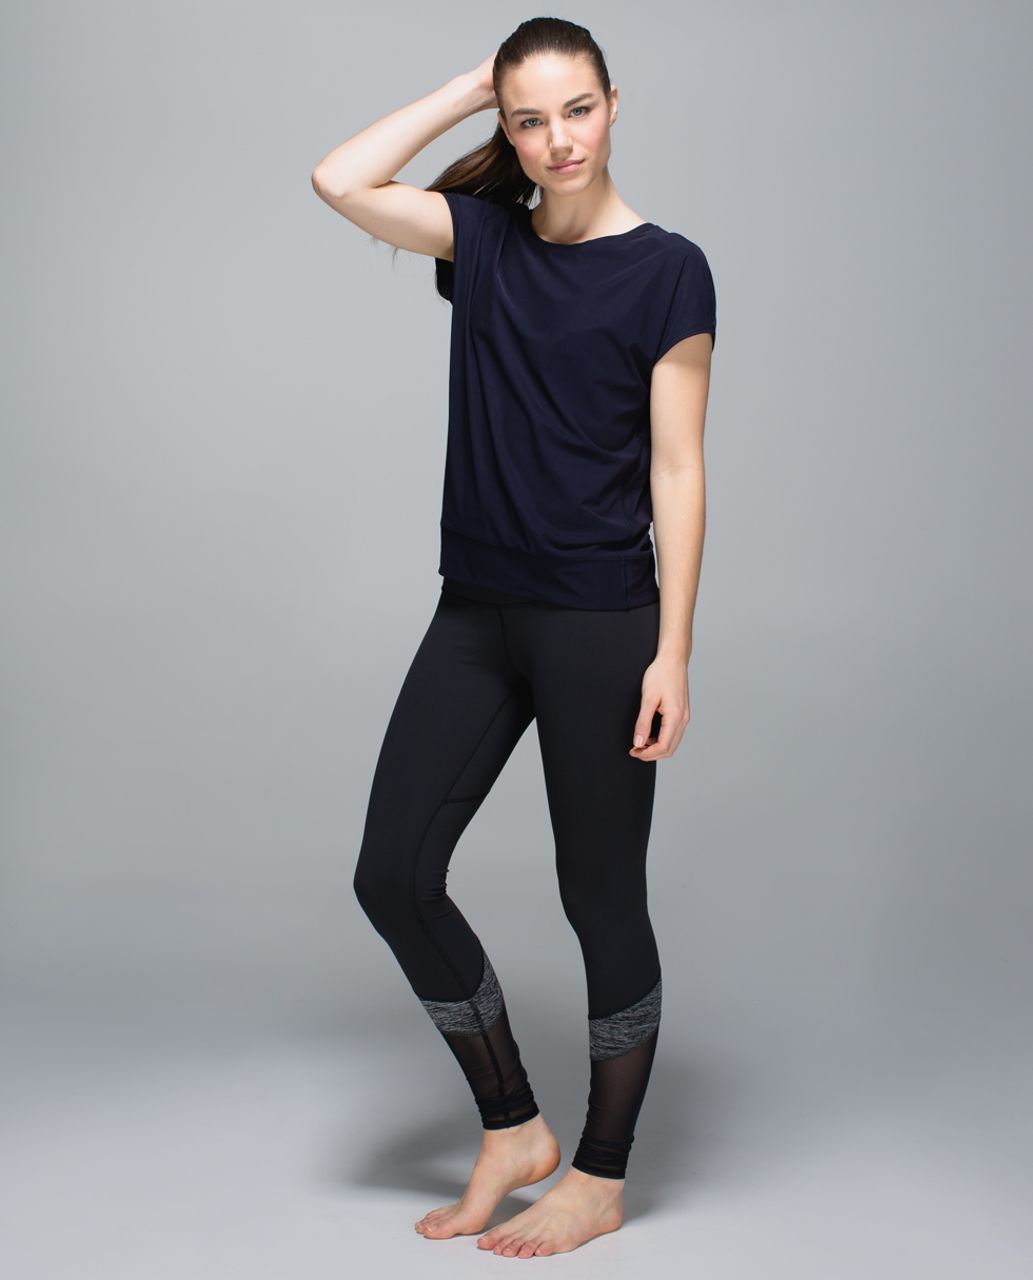 Lululemon Athletica If You Are Lucky Crop Luxtreme Leggings Size 6